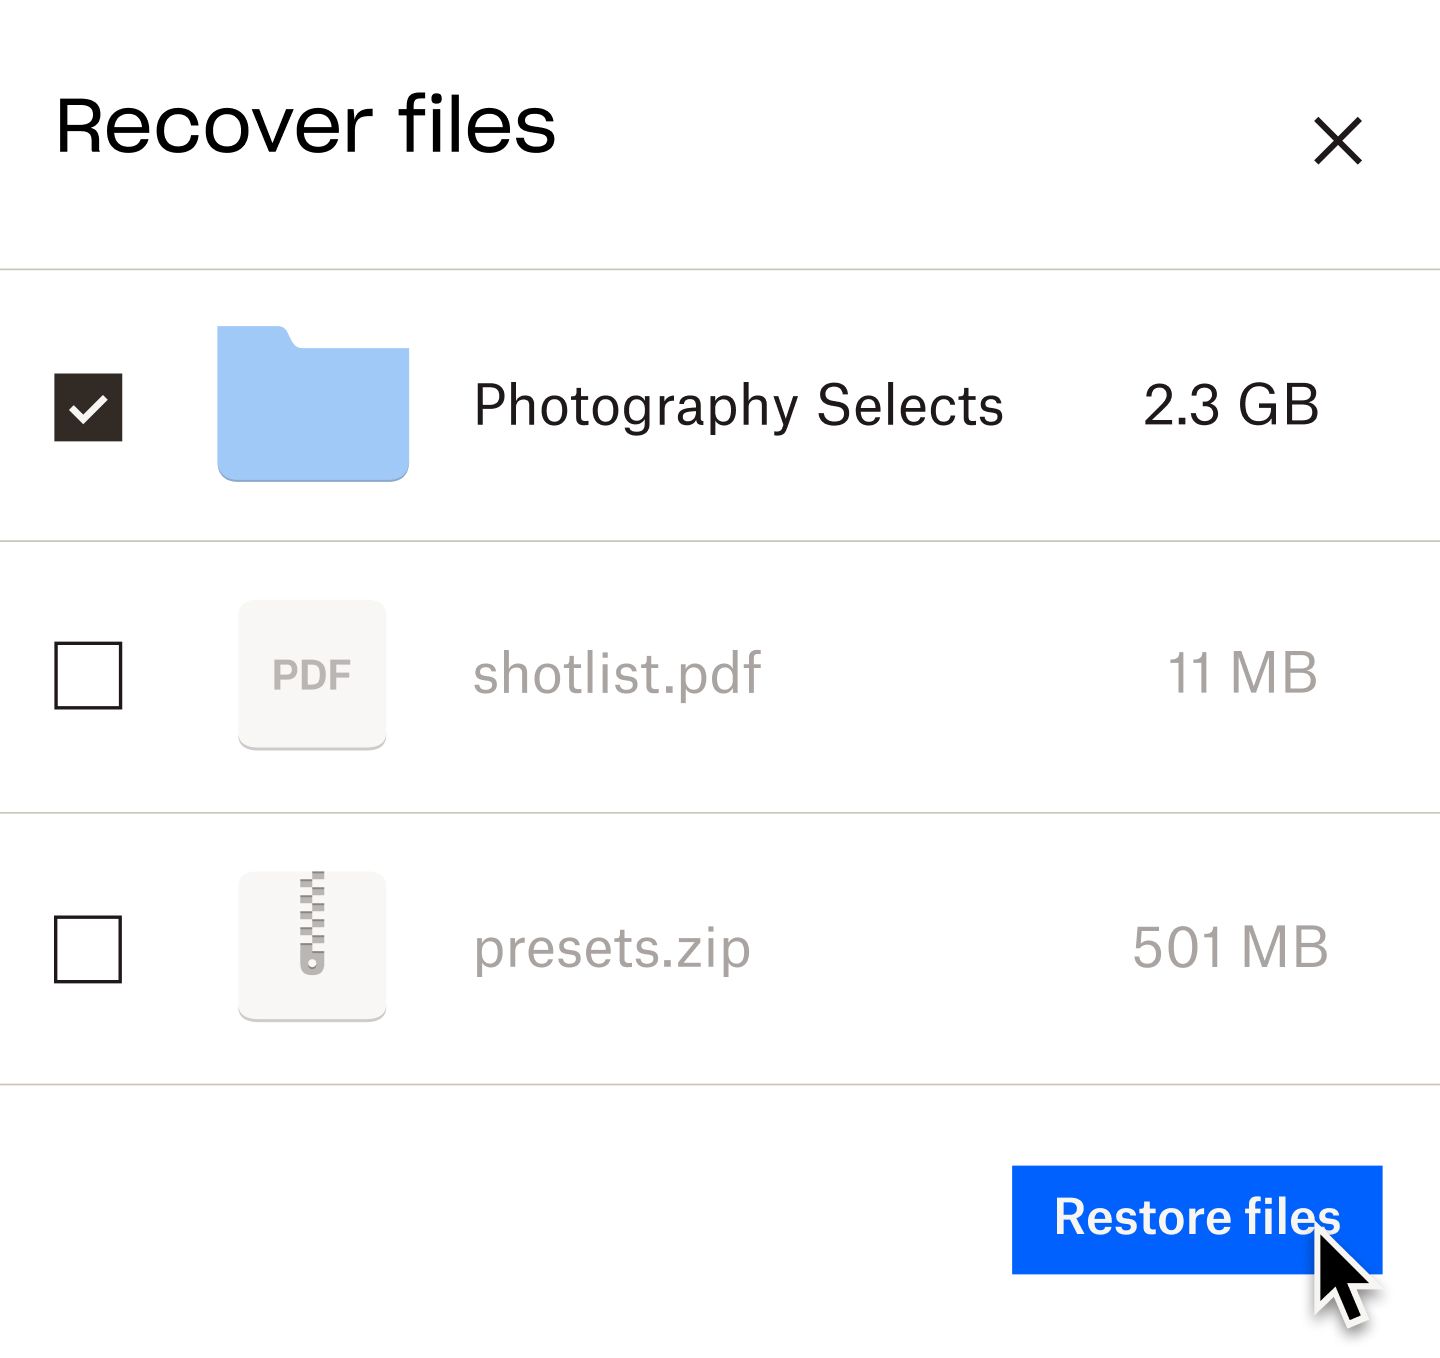 A user clicking on a blue “retore files” button to recover a file labeled “photography selects”